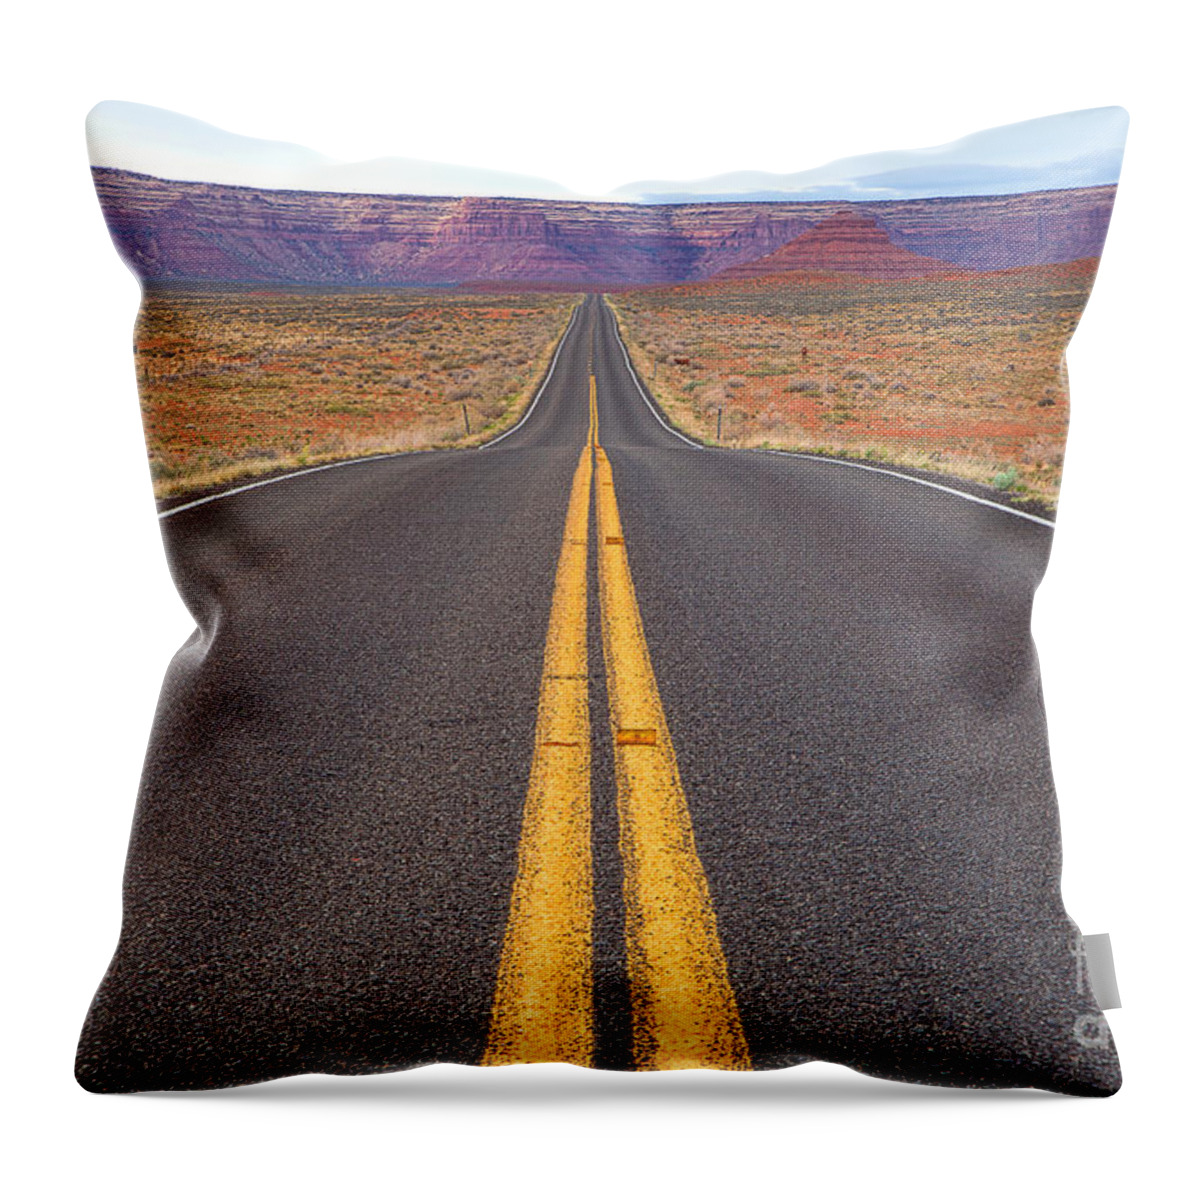 Red Soil Throw Pillow featuring the photograph The Long Road Ahead by Jim Garrison